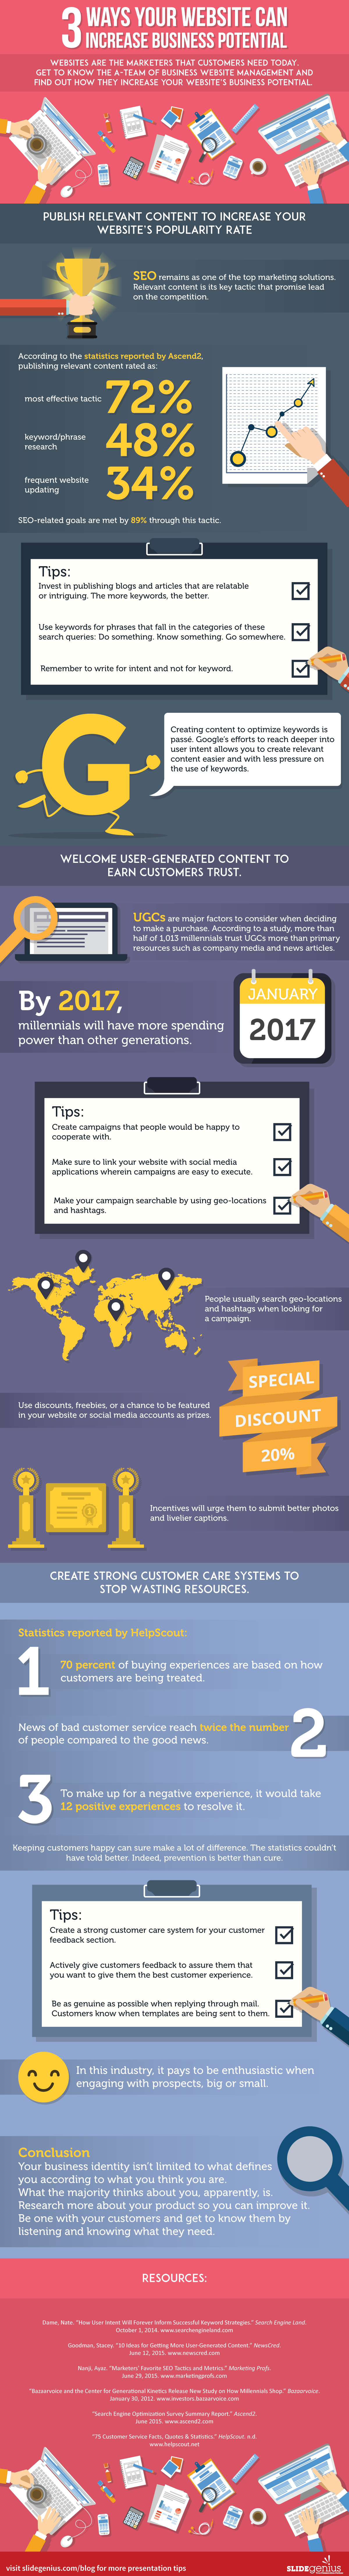 3 Ways Your Website Can Increase Business Potential #Infographic